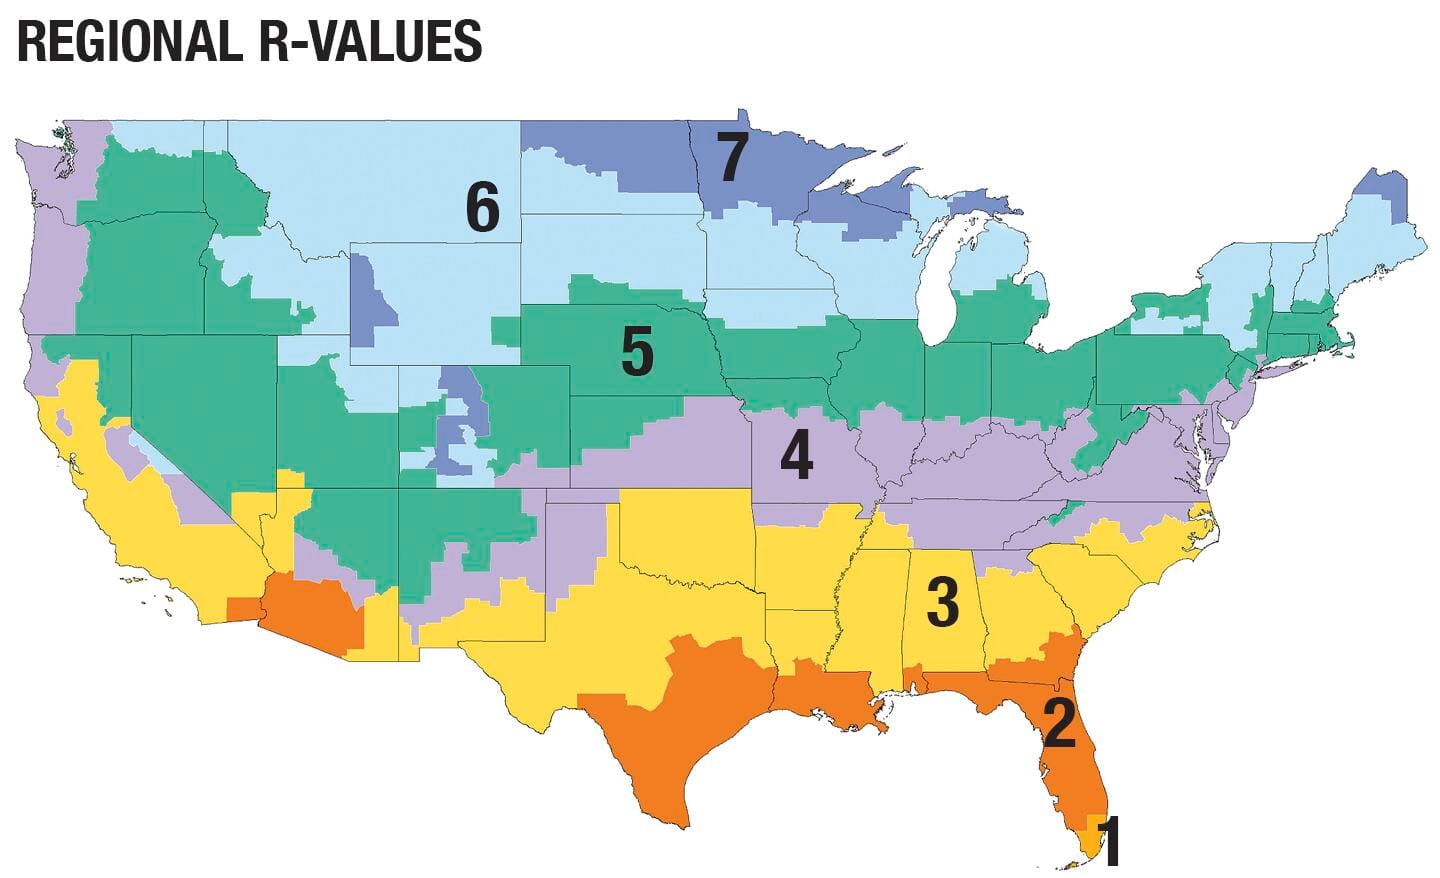 A map of 7 zones used to determine R-values in insulation, with 1 at the tip of Florida and 7 in the farthest north.